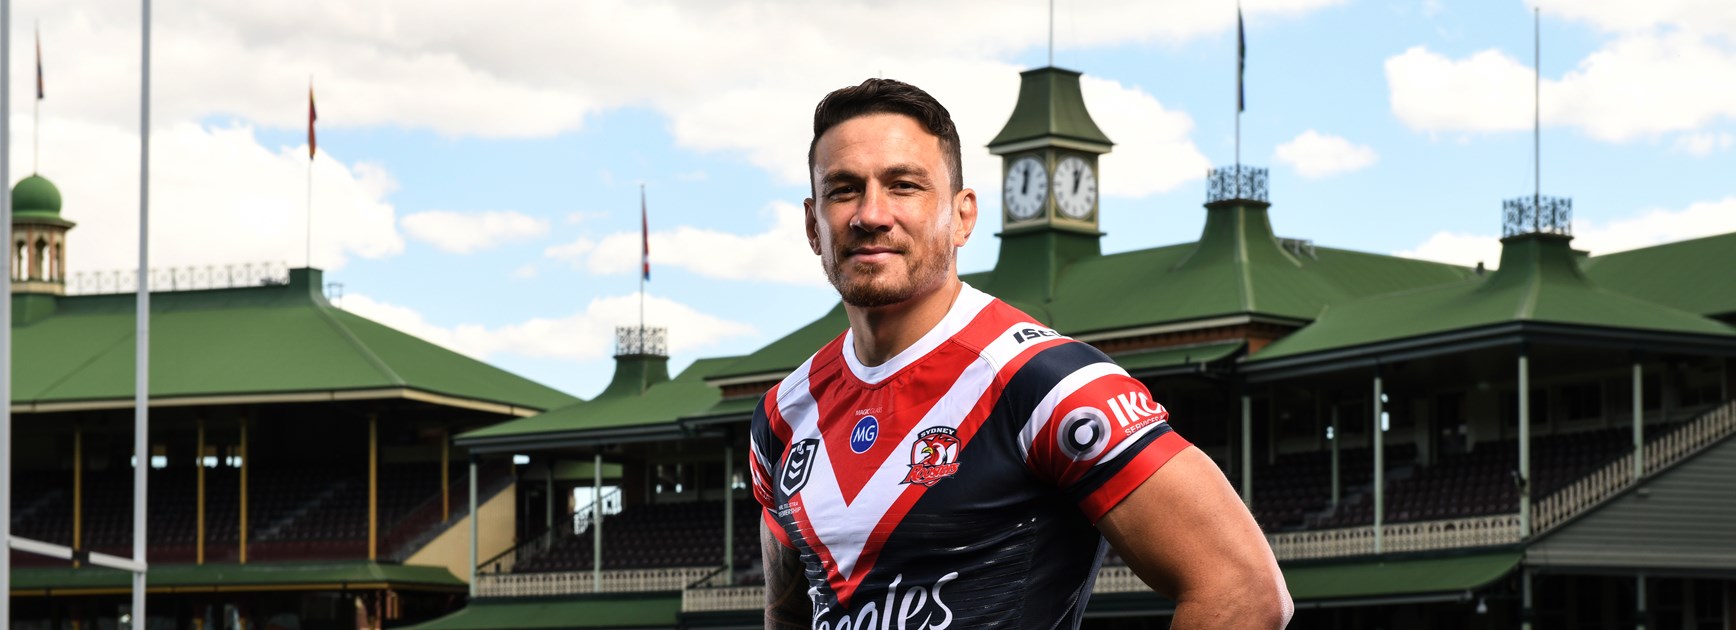 Wolfpack demise means SBW open to NRL offers after neck surgery